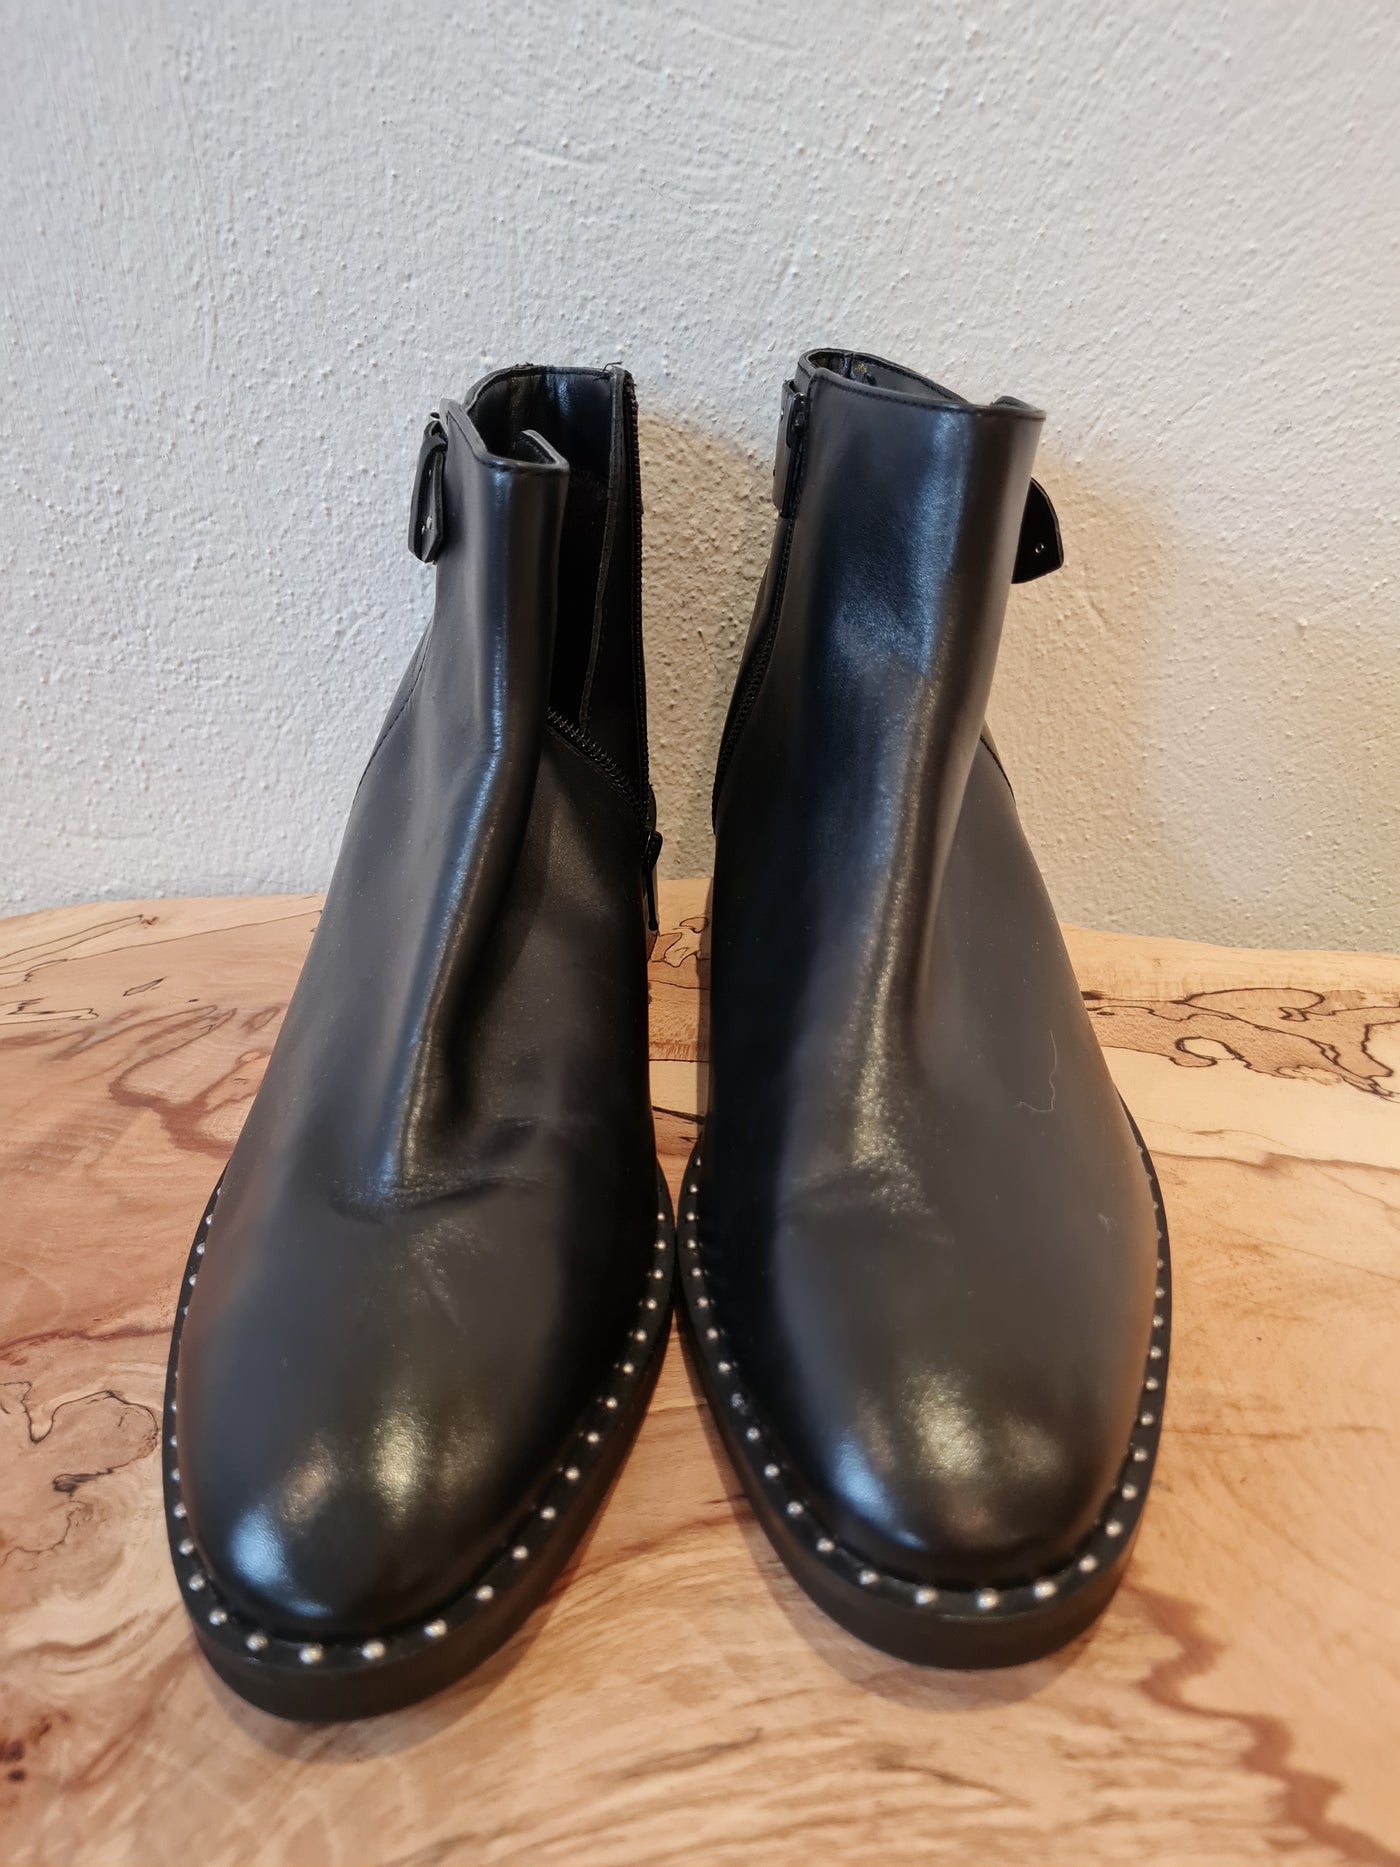 M&S black leather ankle boots 7.5